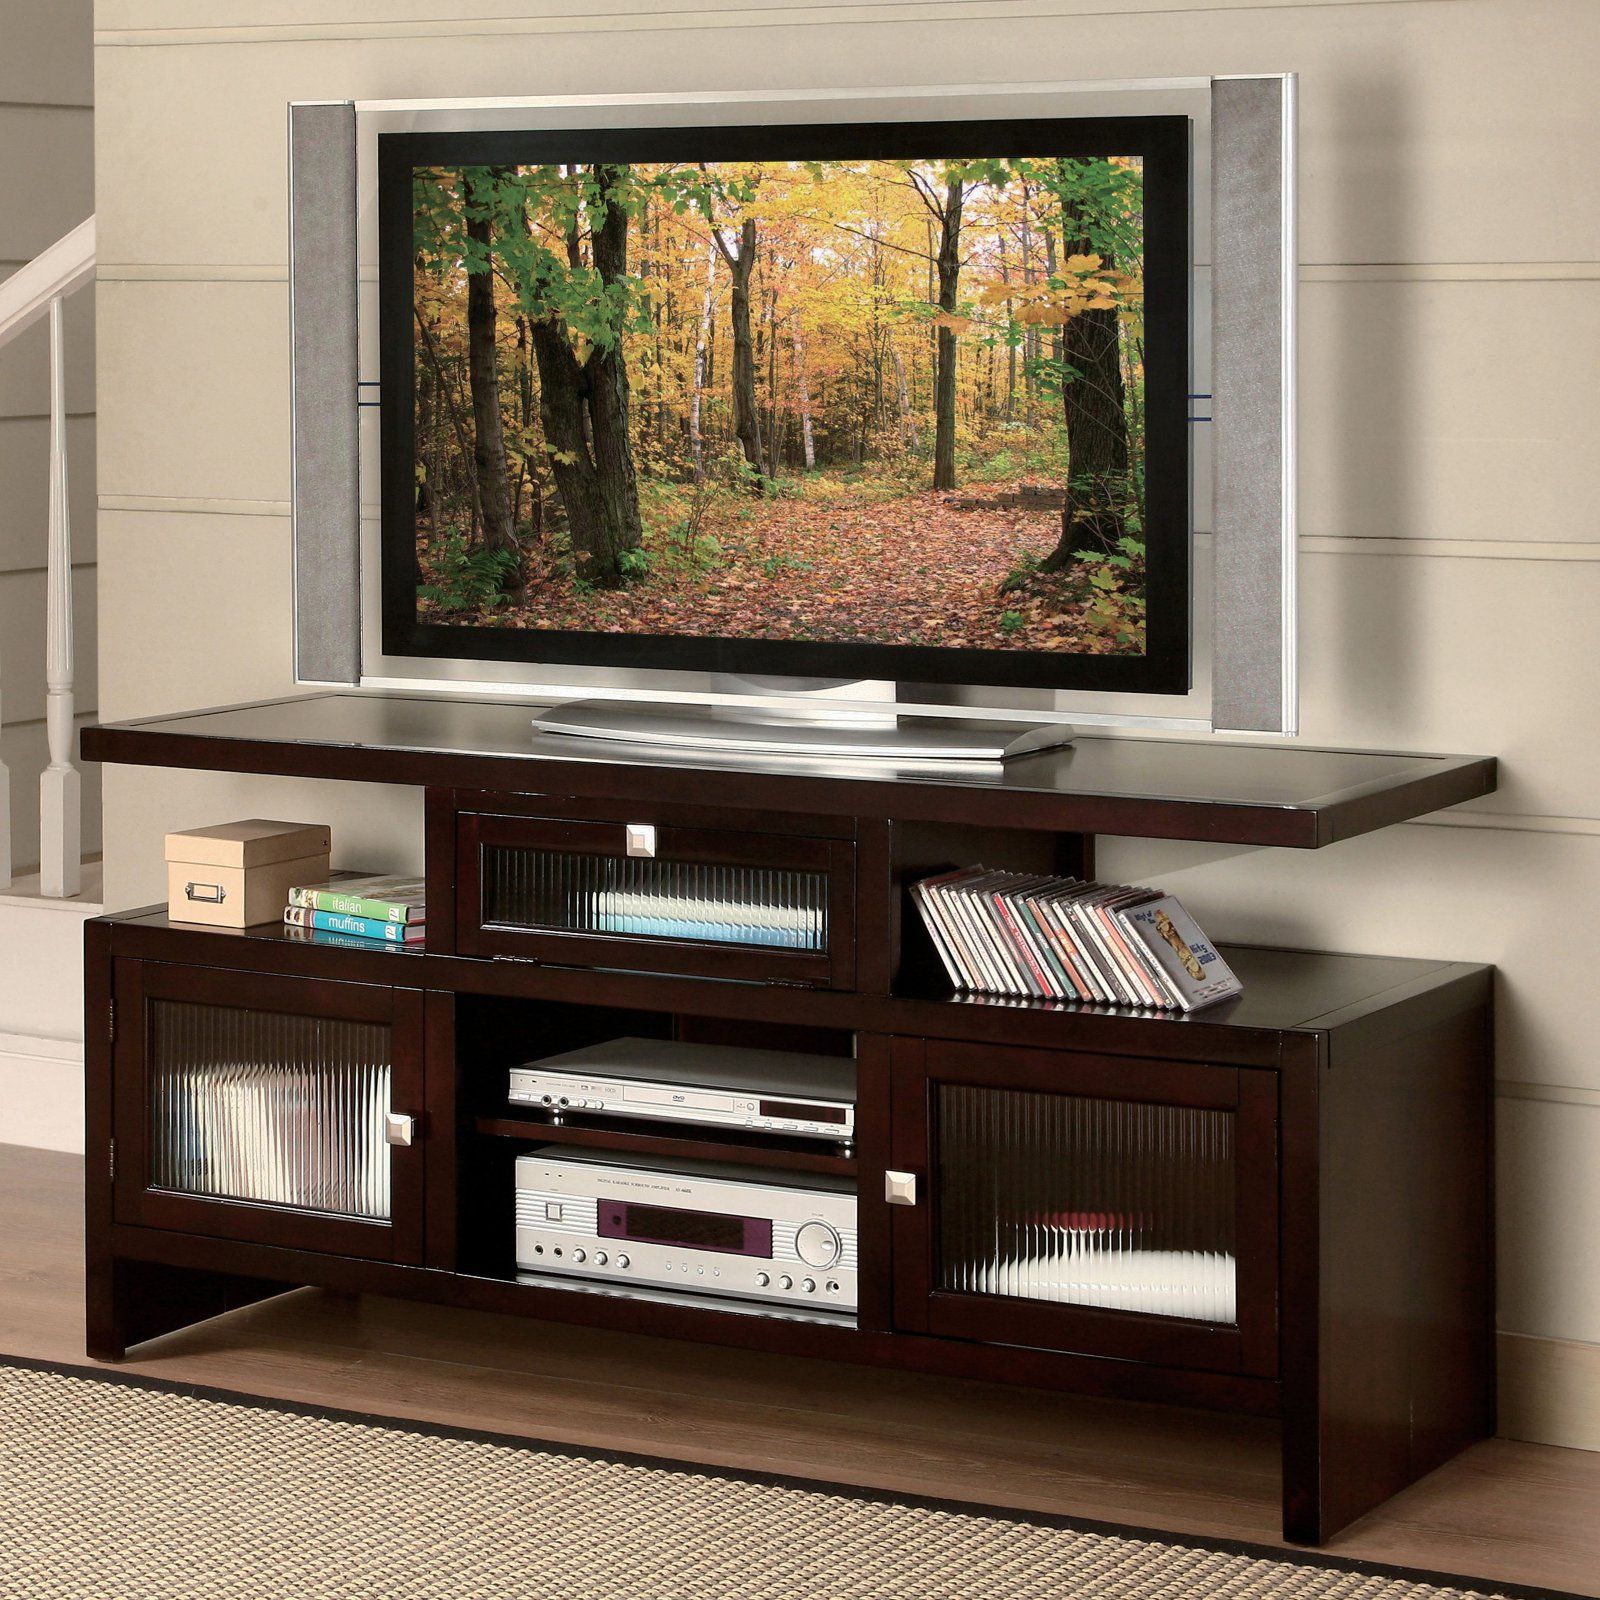 Acme Jupiter Foldable Tv Stand For Tvs Up To 70", Espresso Throughout Broward Tv Stands For Tvs Up To 70" (View 12 of 15)